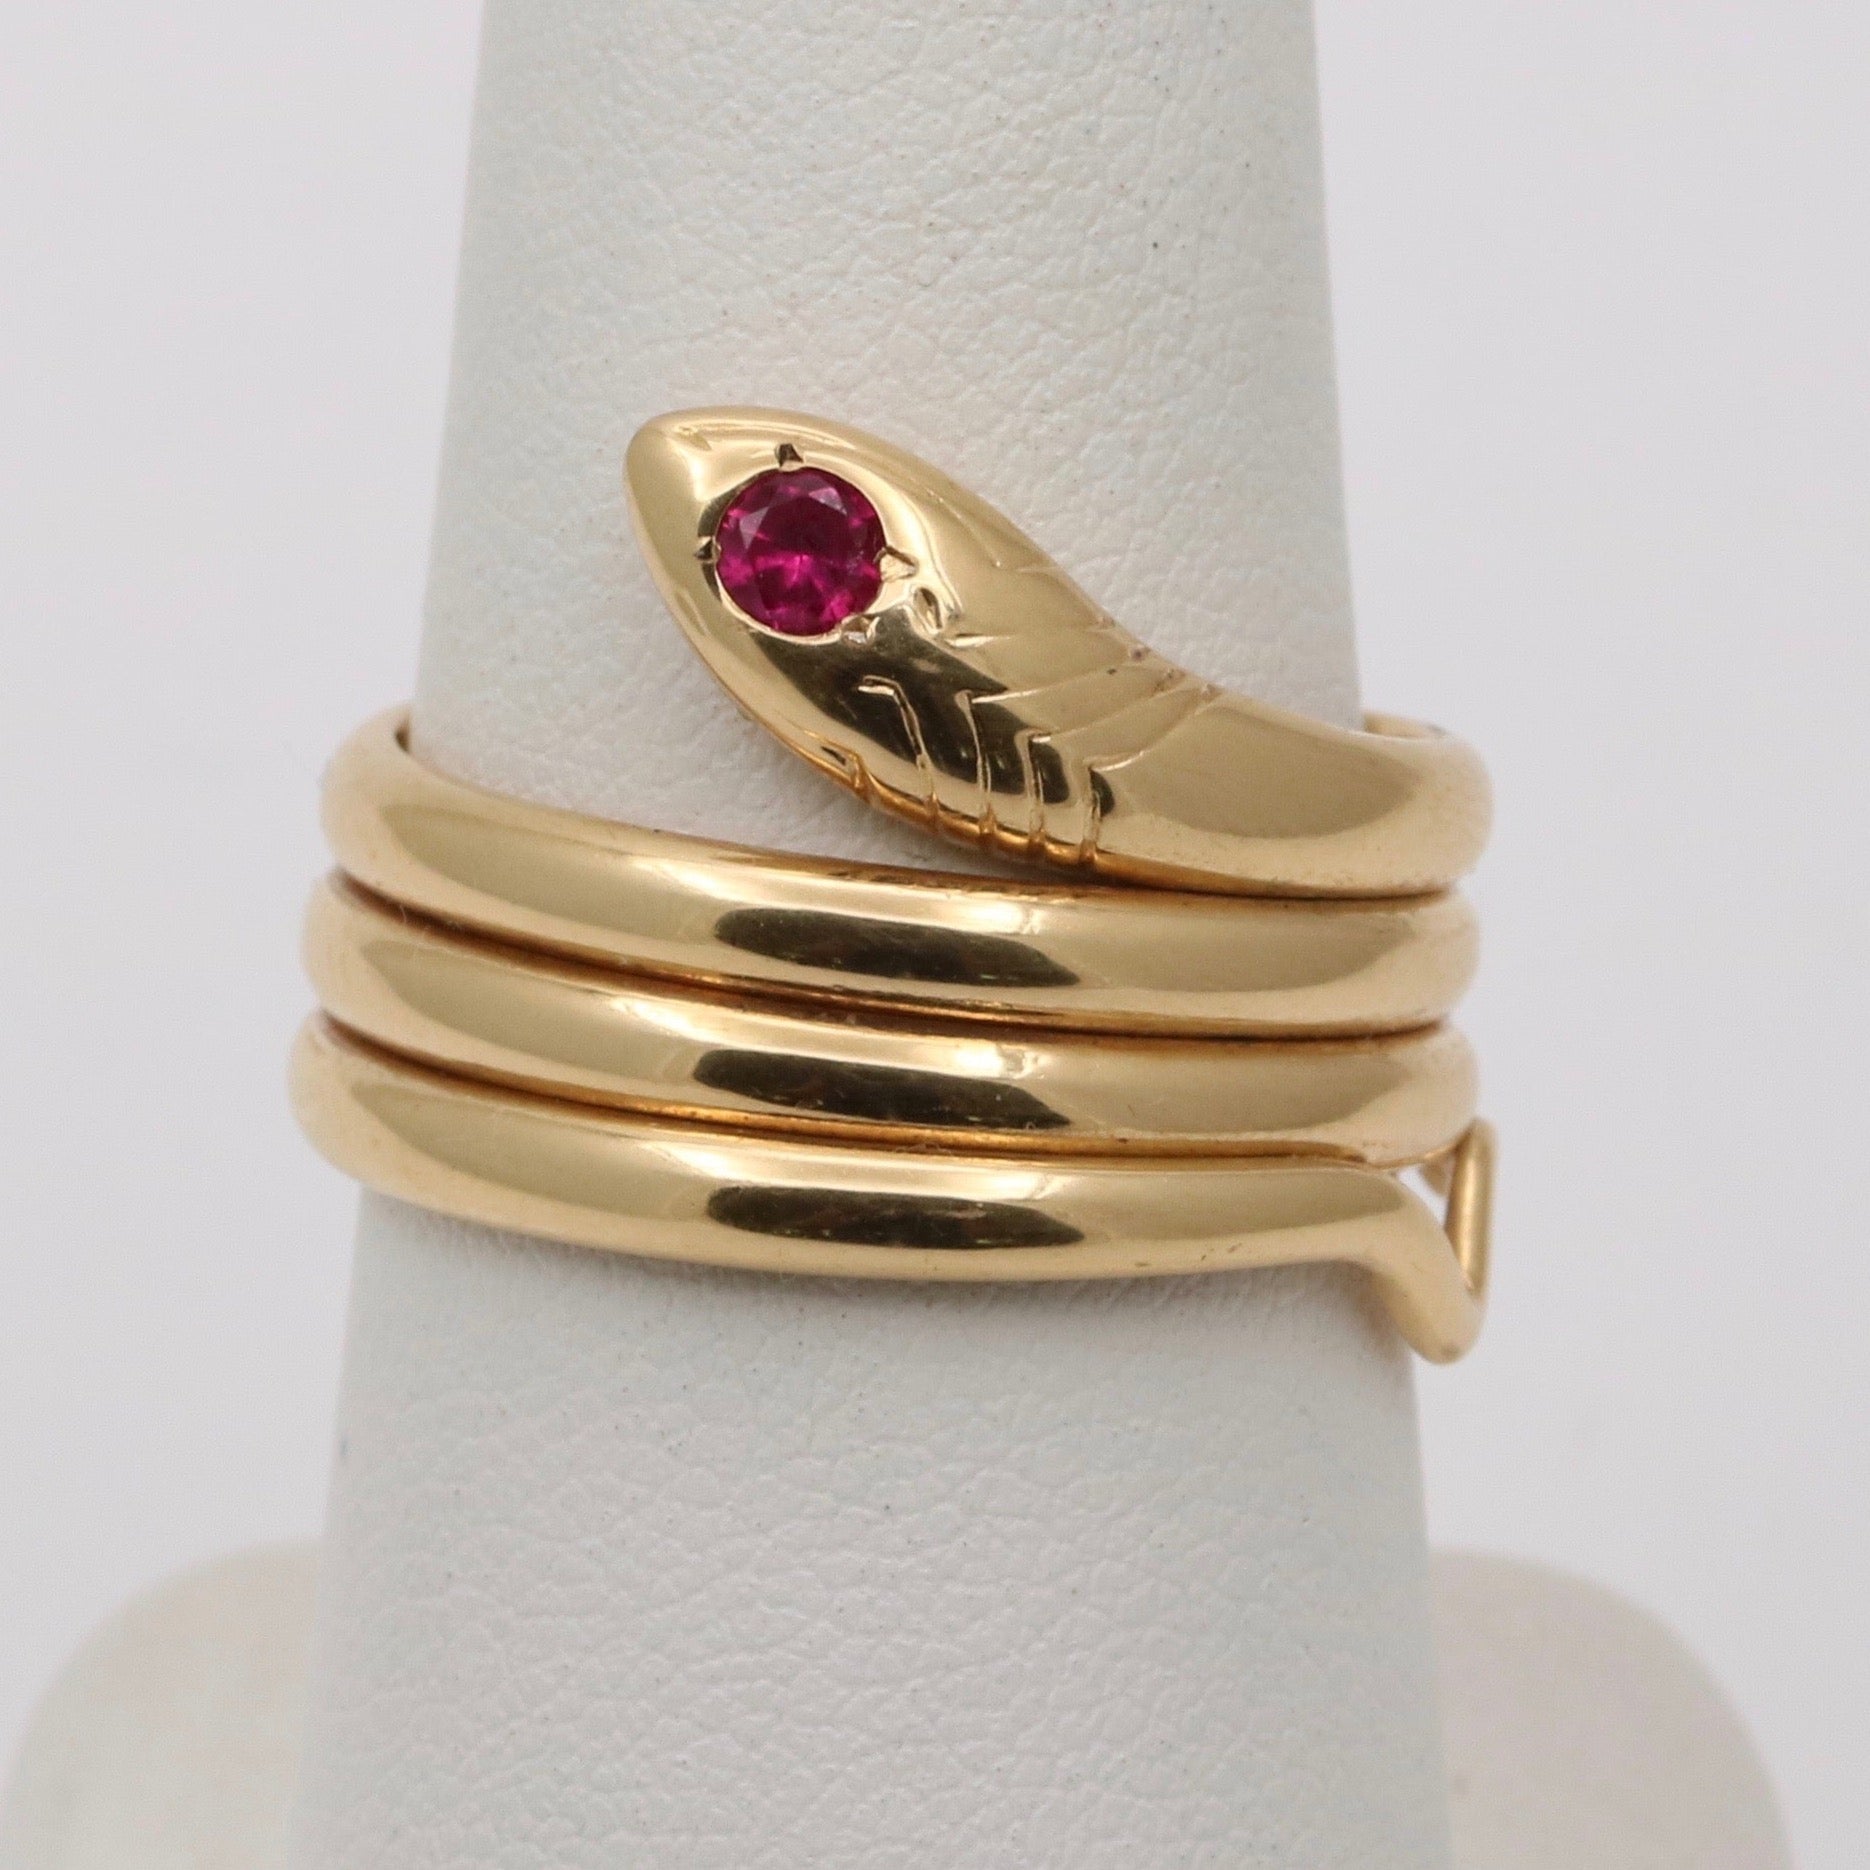 Vintage 18K Gold and Ruby Coiled Snake Ring